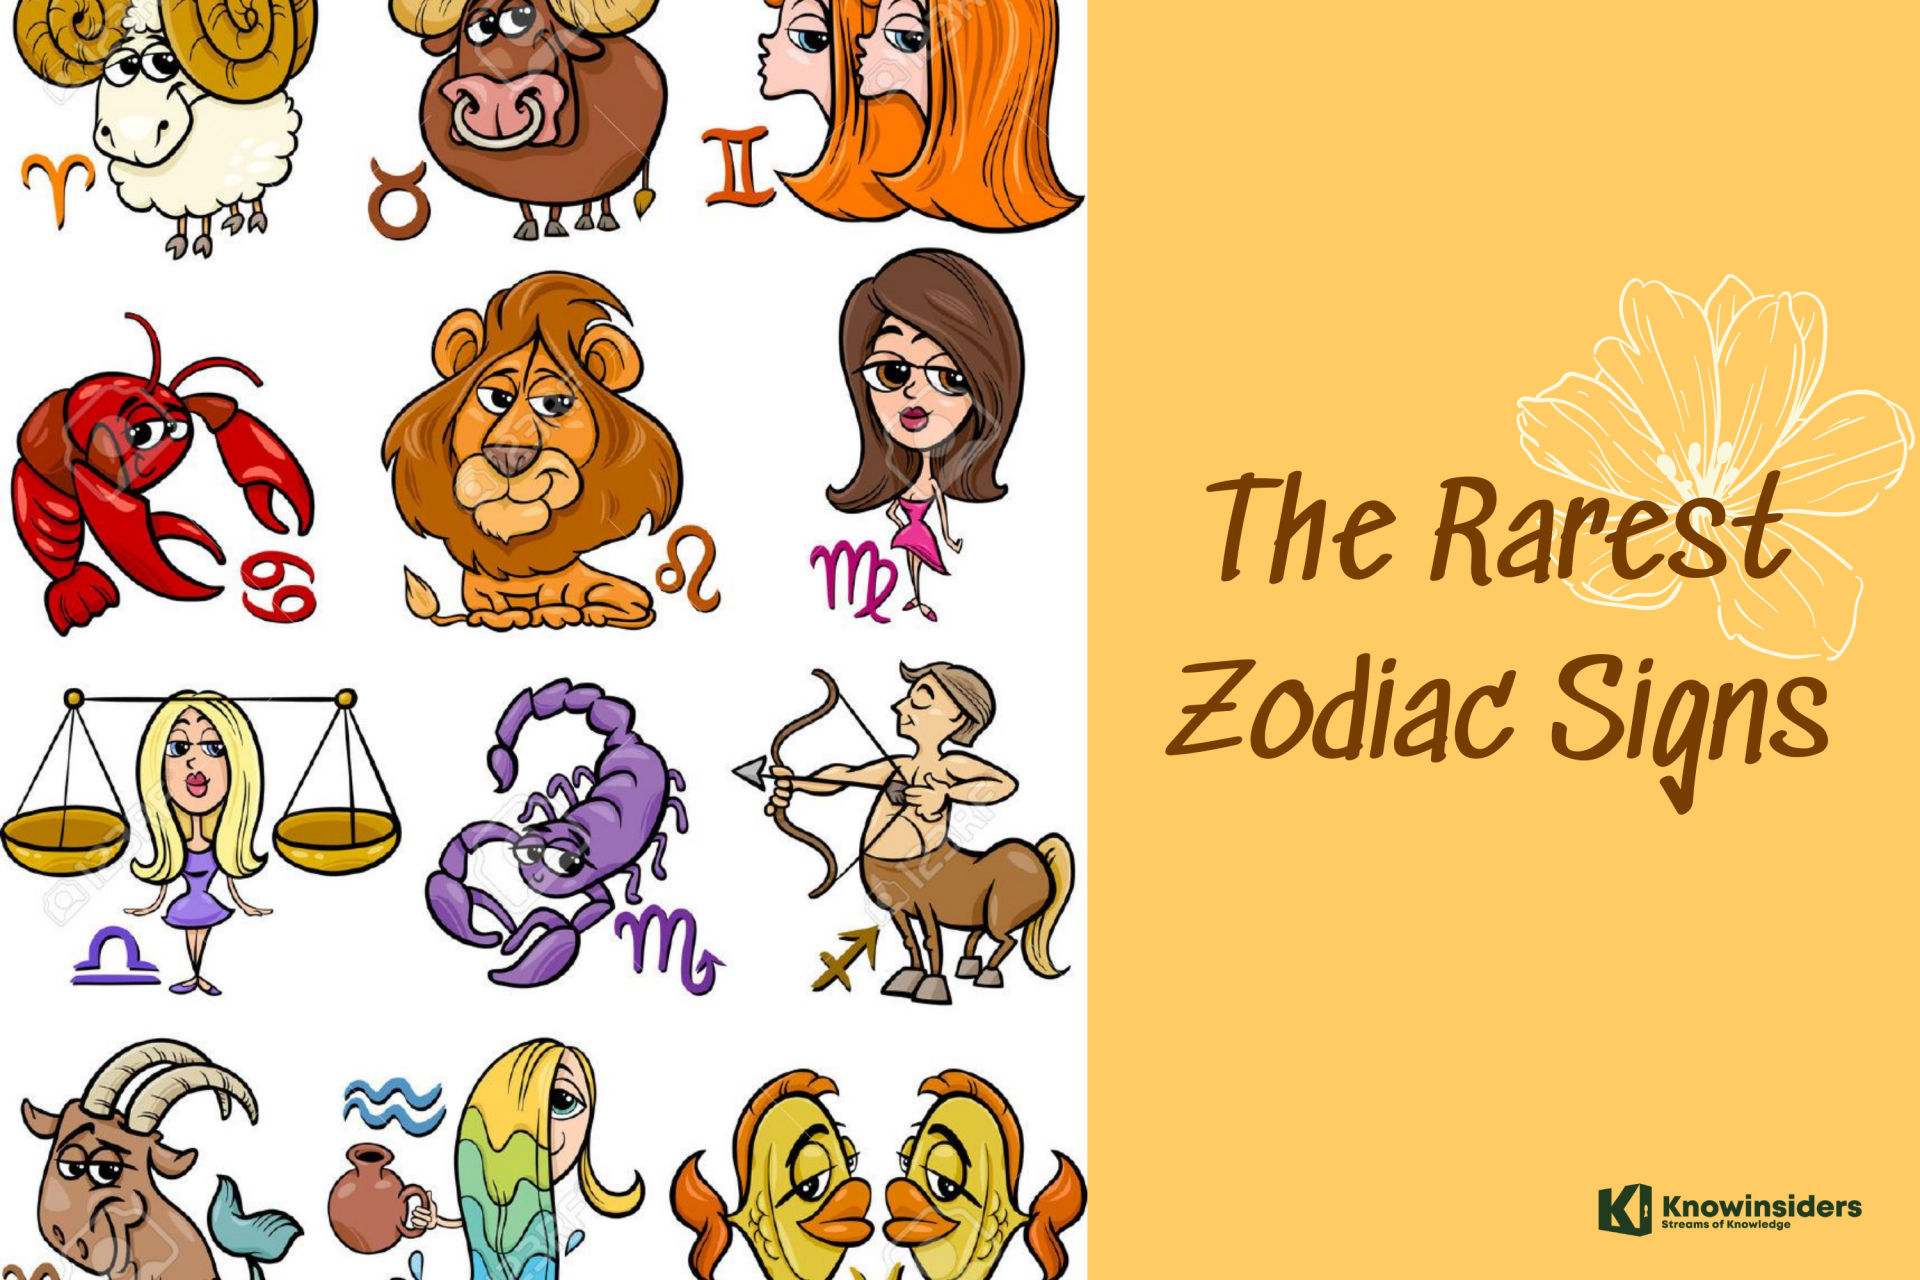 What Is The Rarest Zodiac Sign: Surprising Facts